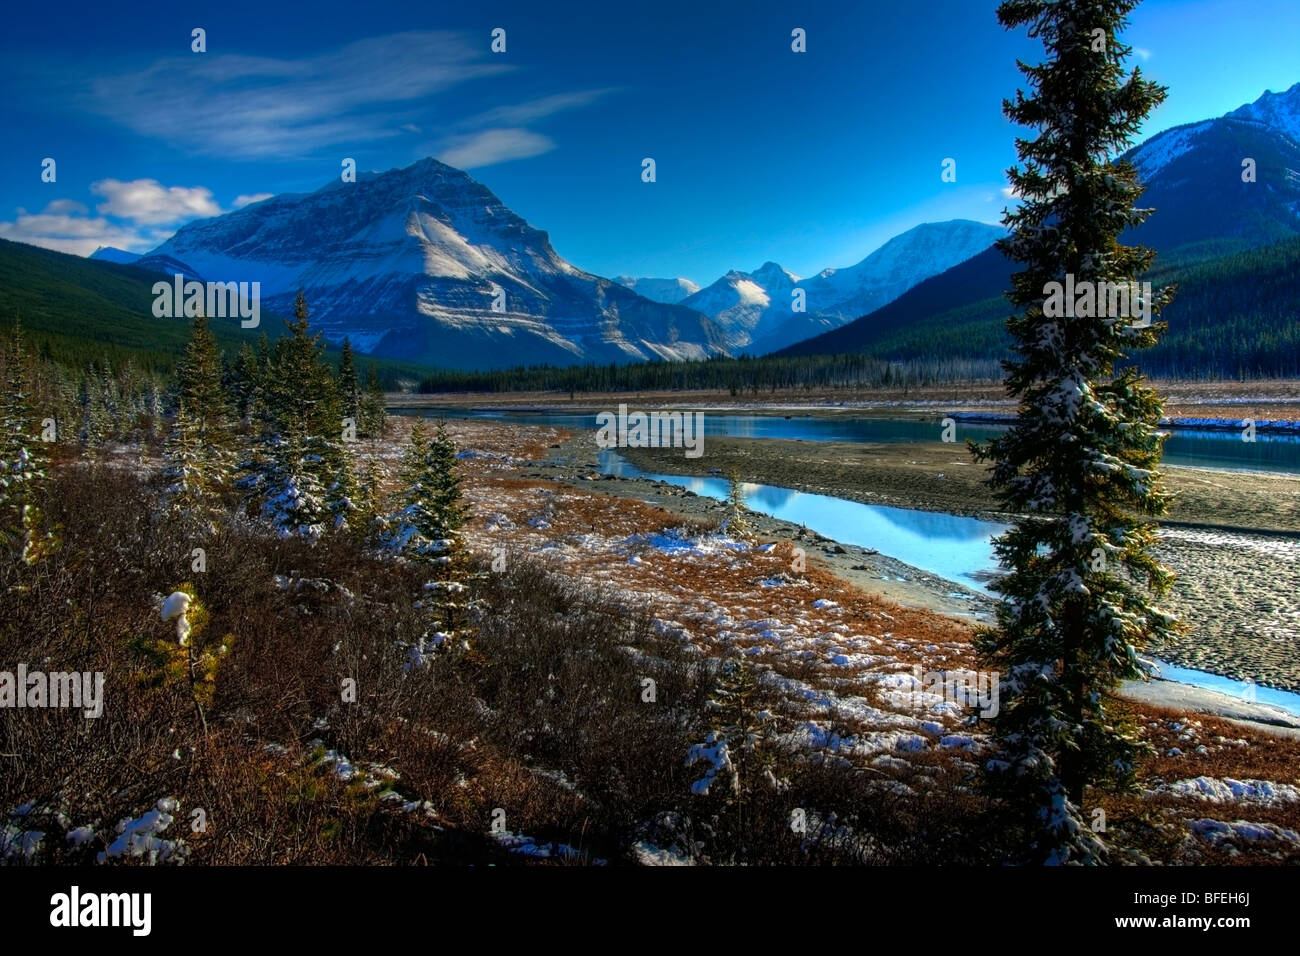 Athabasca River along the Columbia Icefields Parkway in Jasper National Park, Alberta, Canada Stock Photo